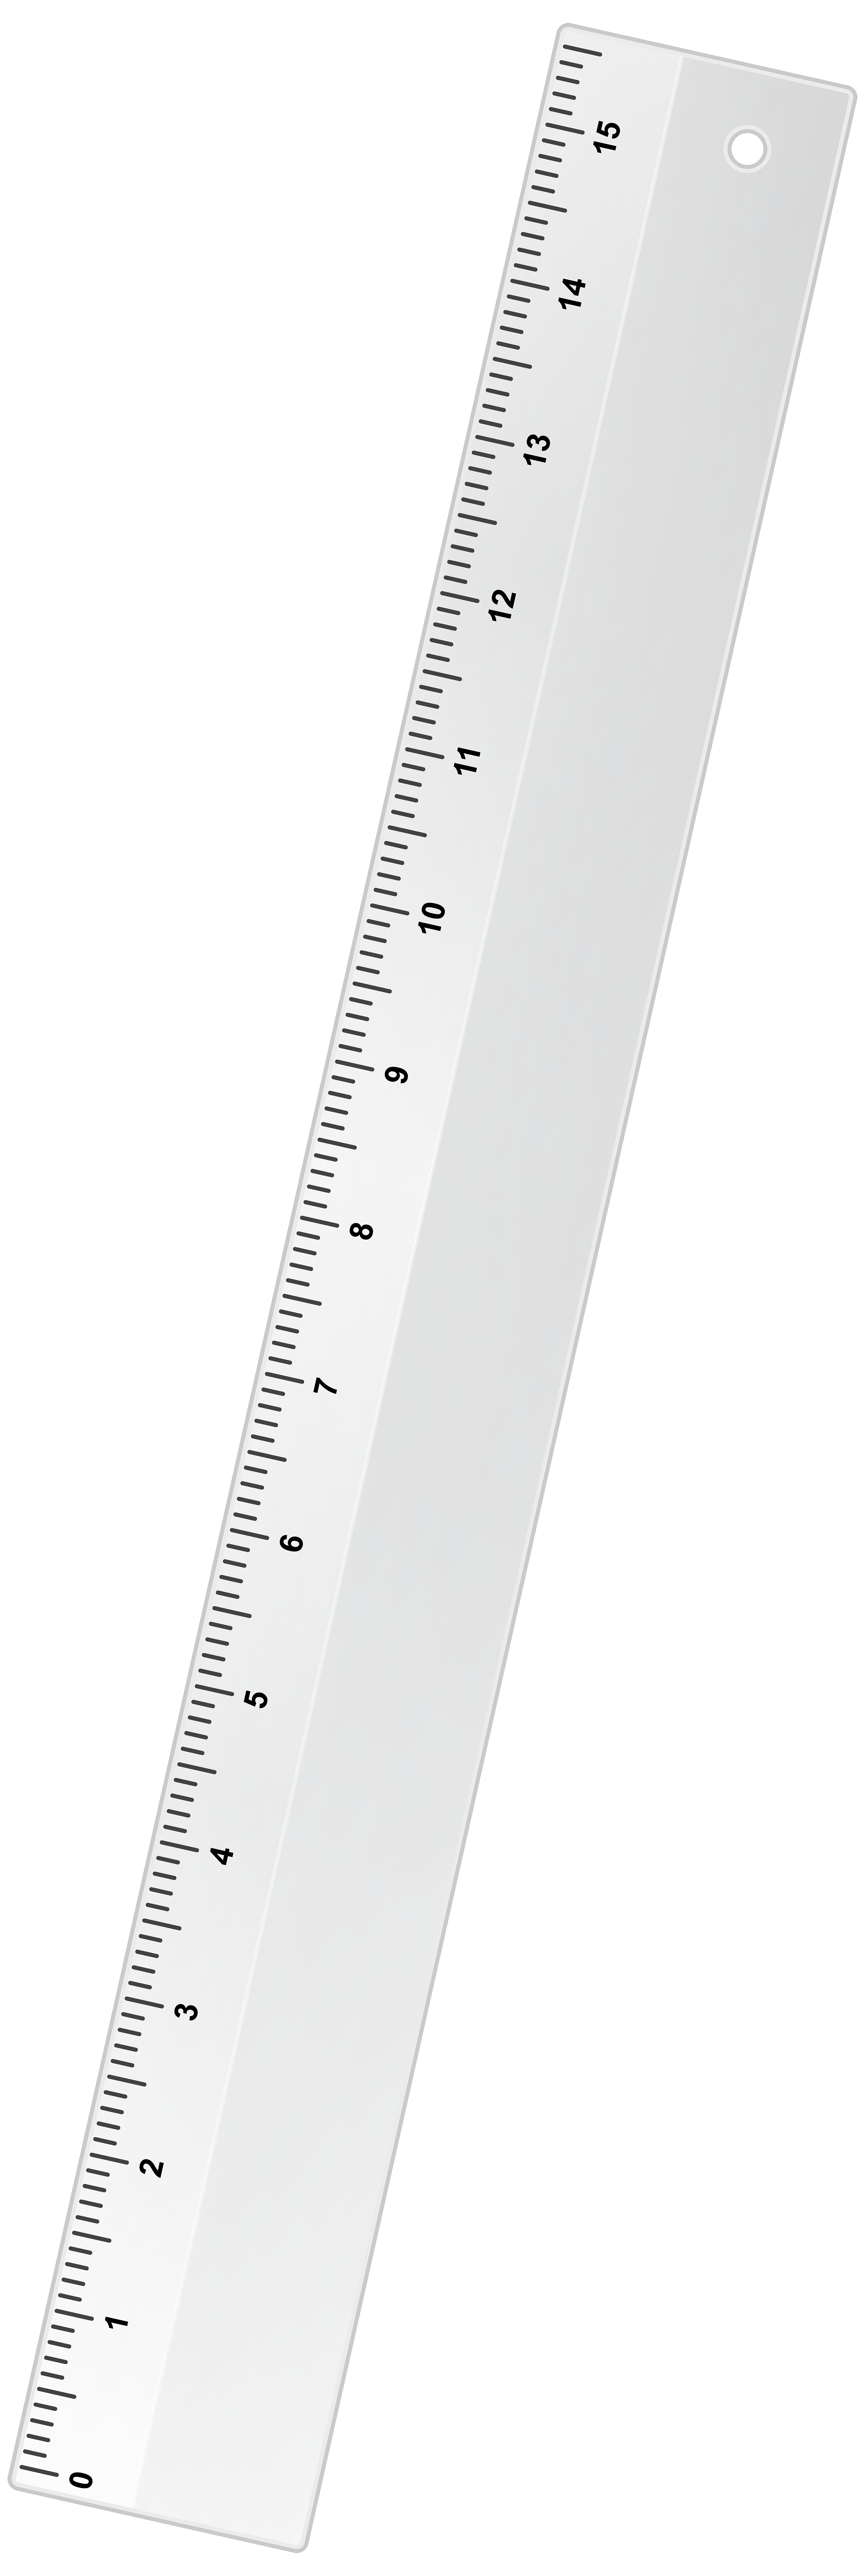 12 Inch Ruler Png